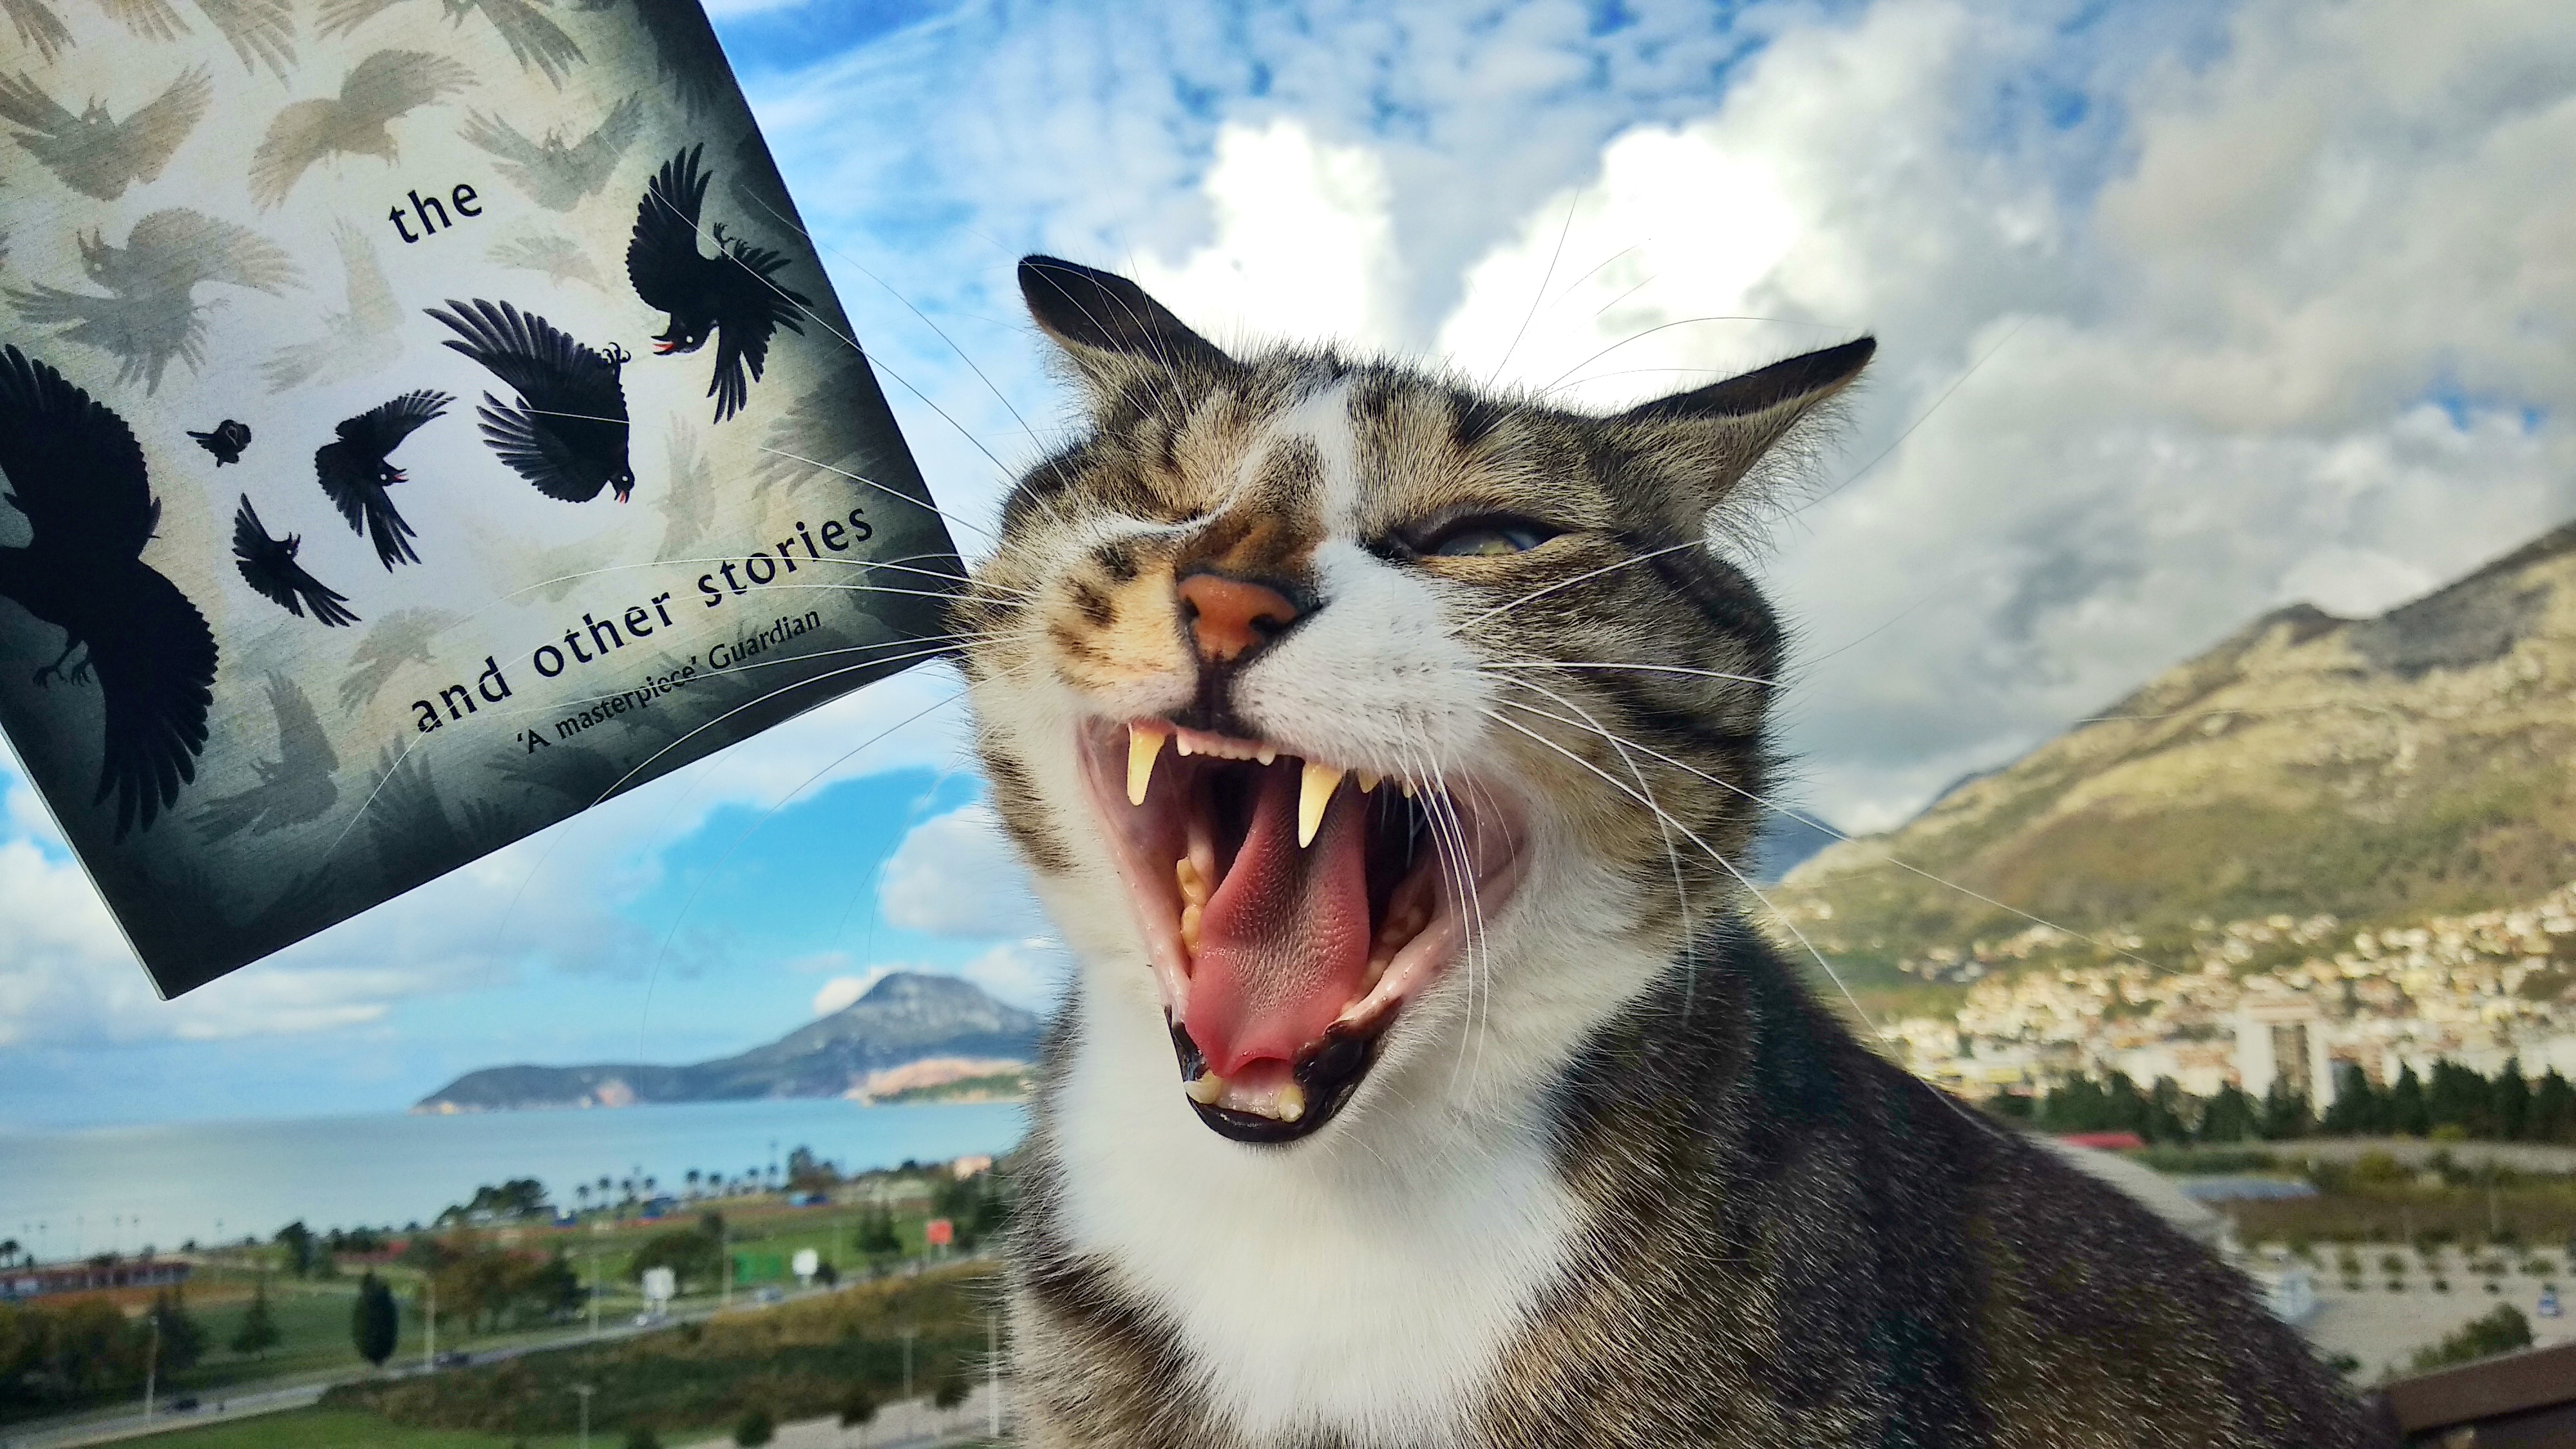 Pirate the cat with his mouth open wide near the book